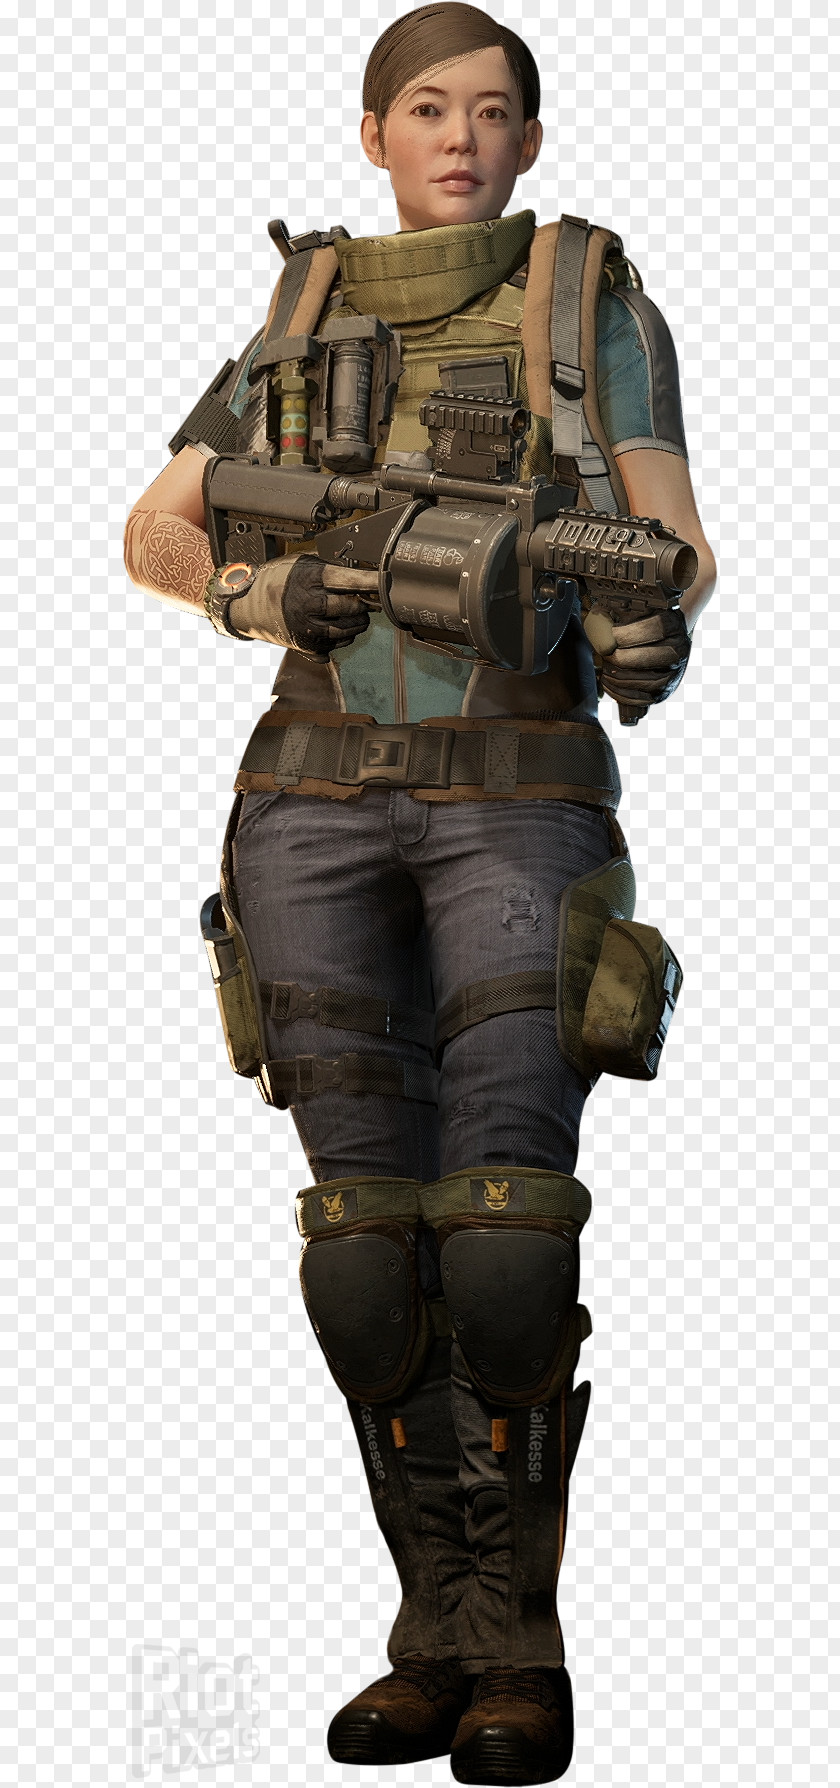 Cyberpunk 2077 Tom Clancy's The Division 2 Ubisoft Game Electronic Entertainment Expo 2018 PNG